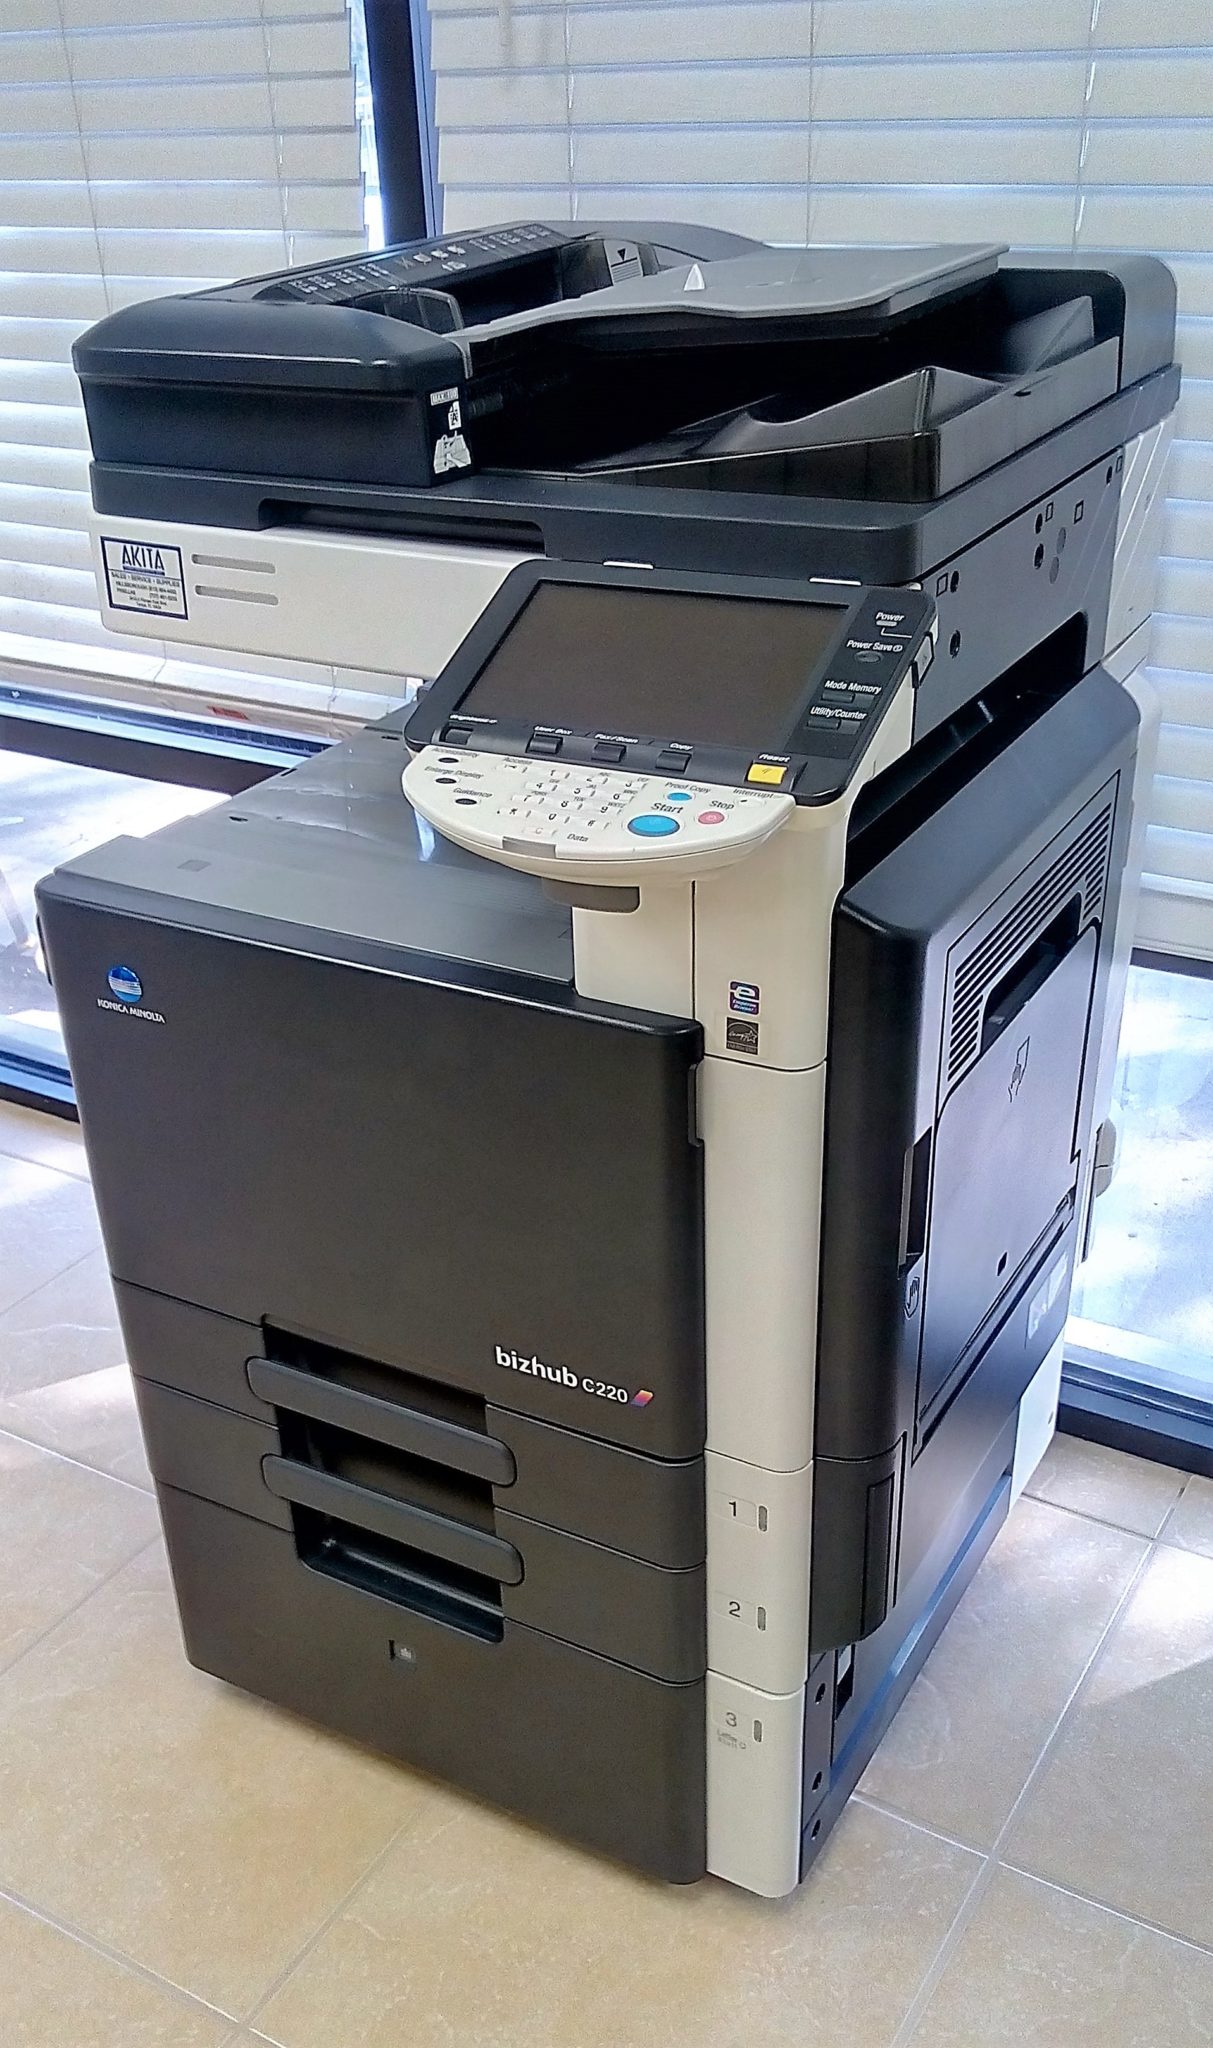 used copiers in tampa fl,used photocopiers tampa,used copiers tampa,used copiers tampa fl